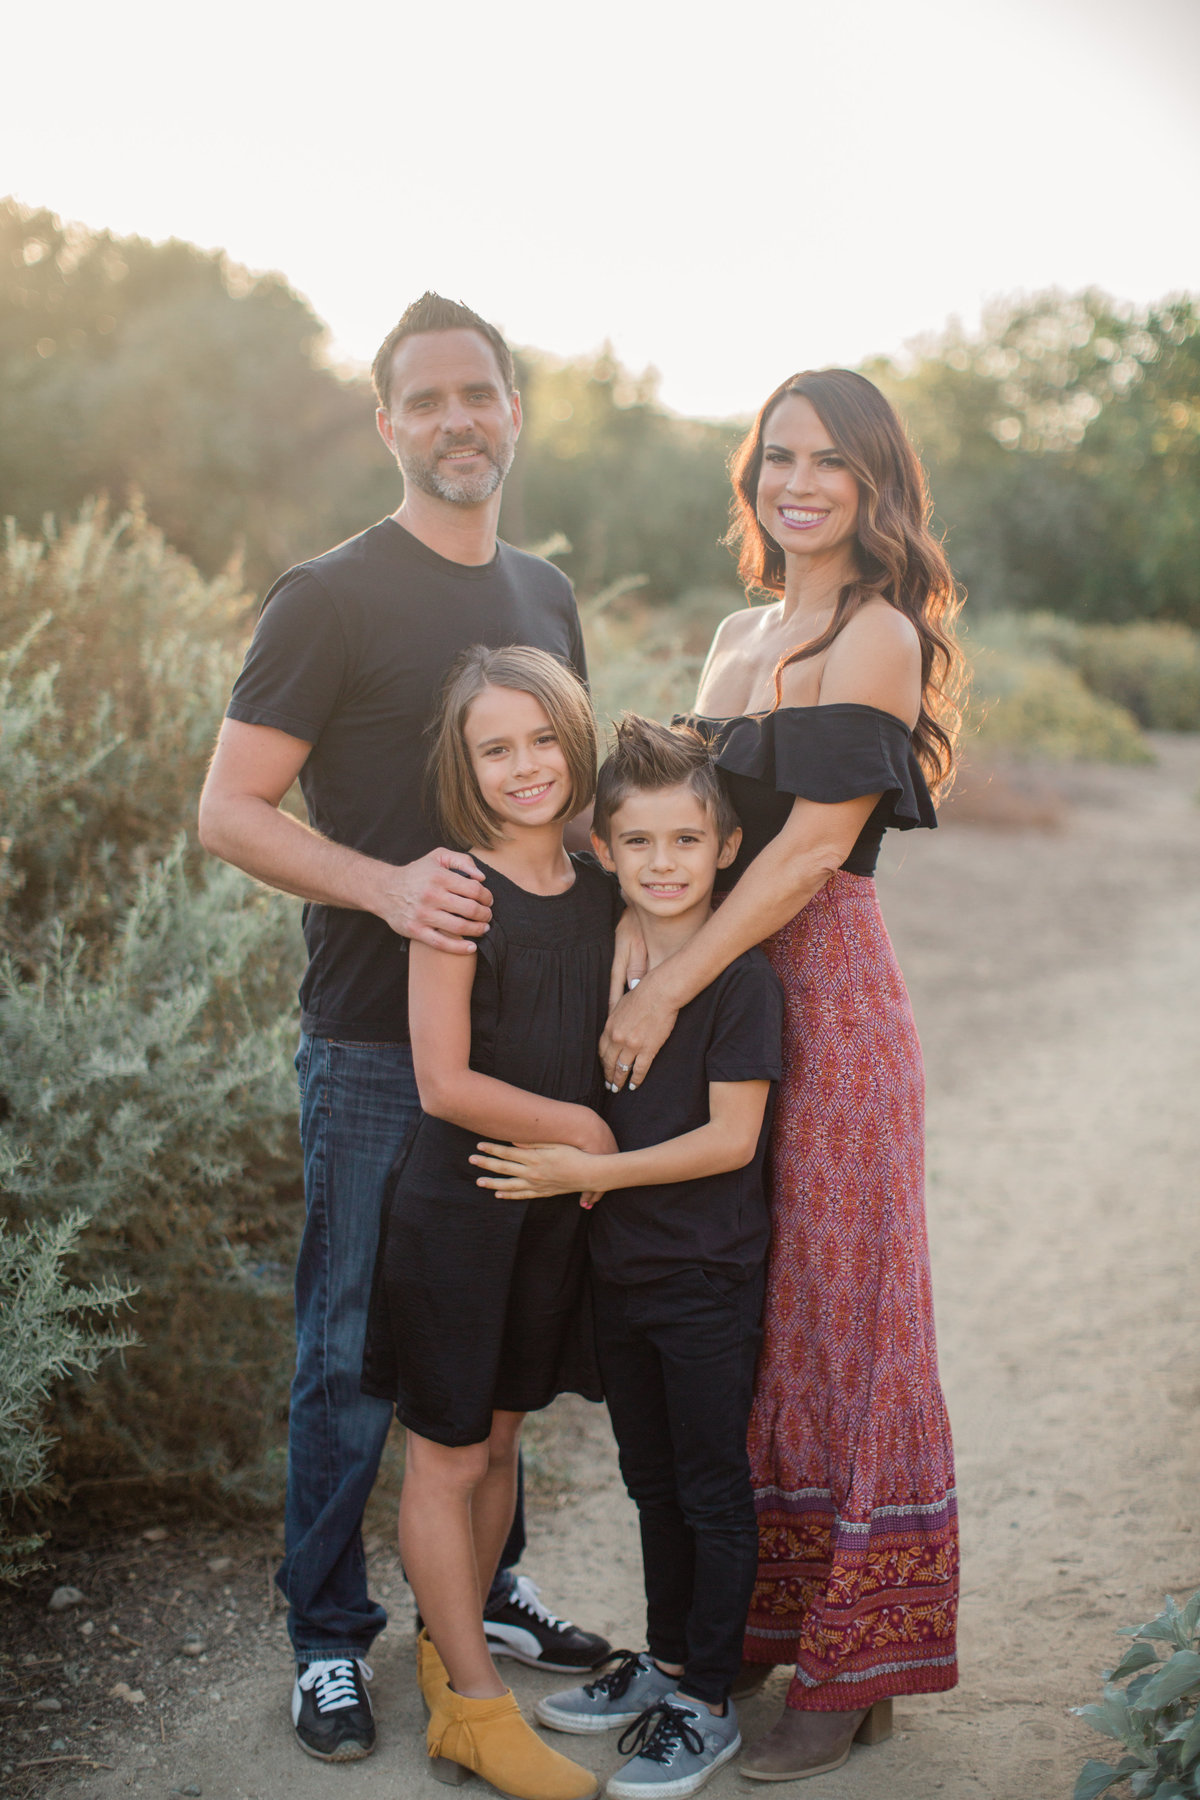 The Stillings Family 2018 | Redlands Family Photographer | Katie Schoepflin Photography51